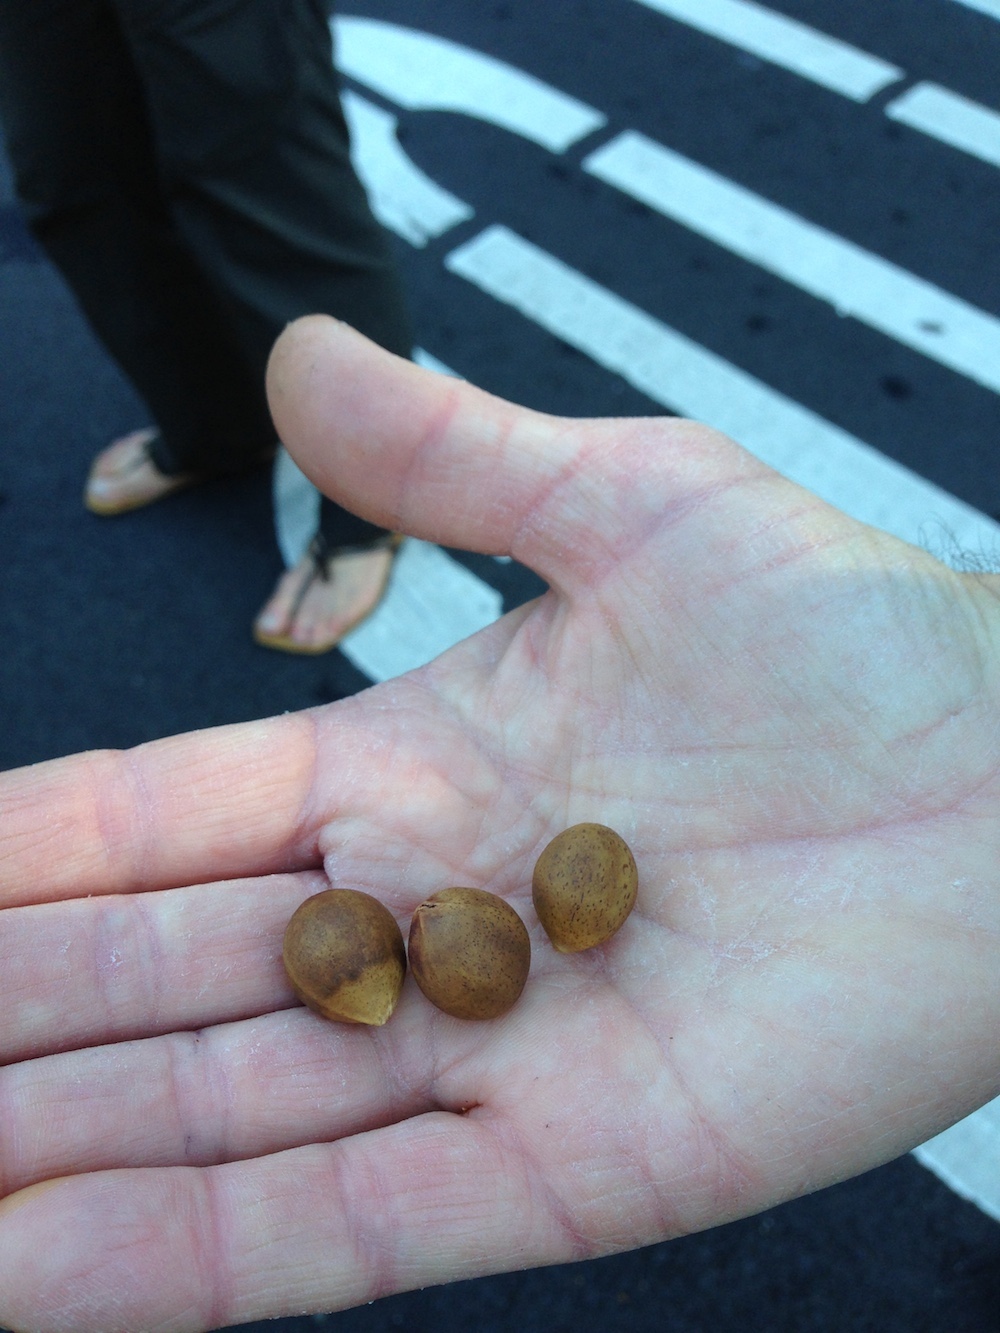 Carlson displays bay laurel nuts he foraged and roasted from a nearby tree. Photo: Angela Johnston